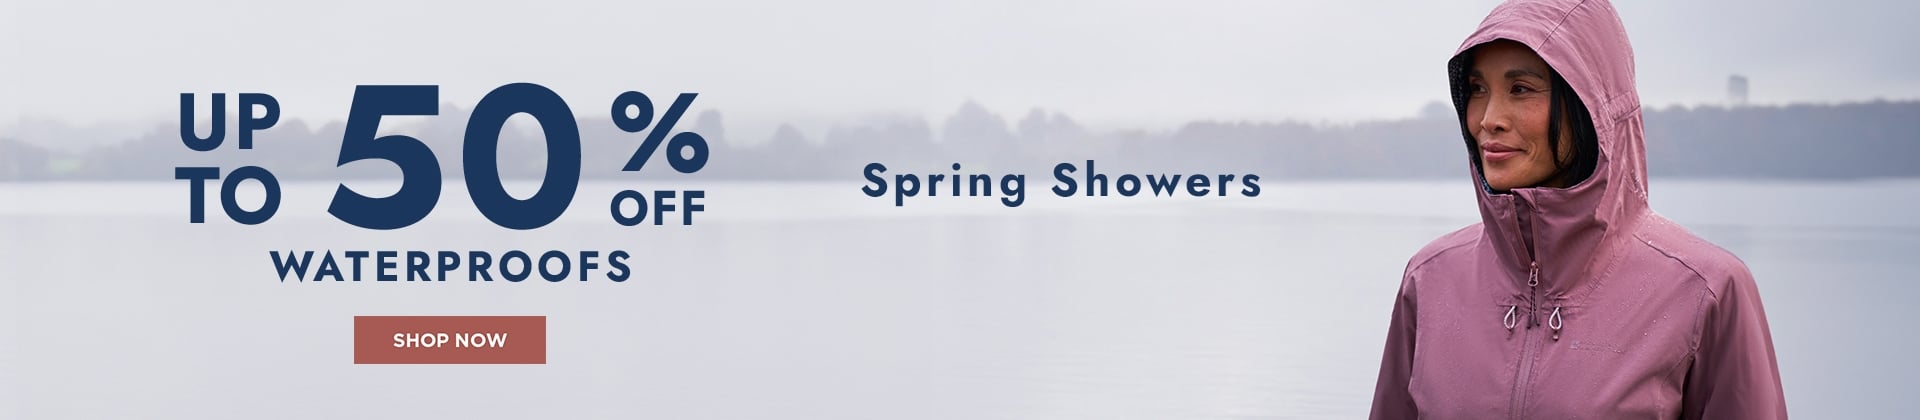 H1: SPRING SHOWERS